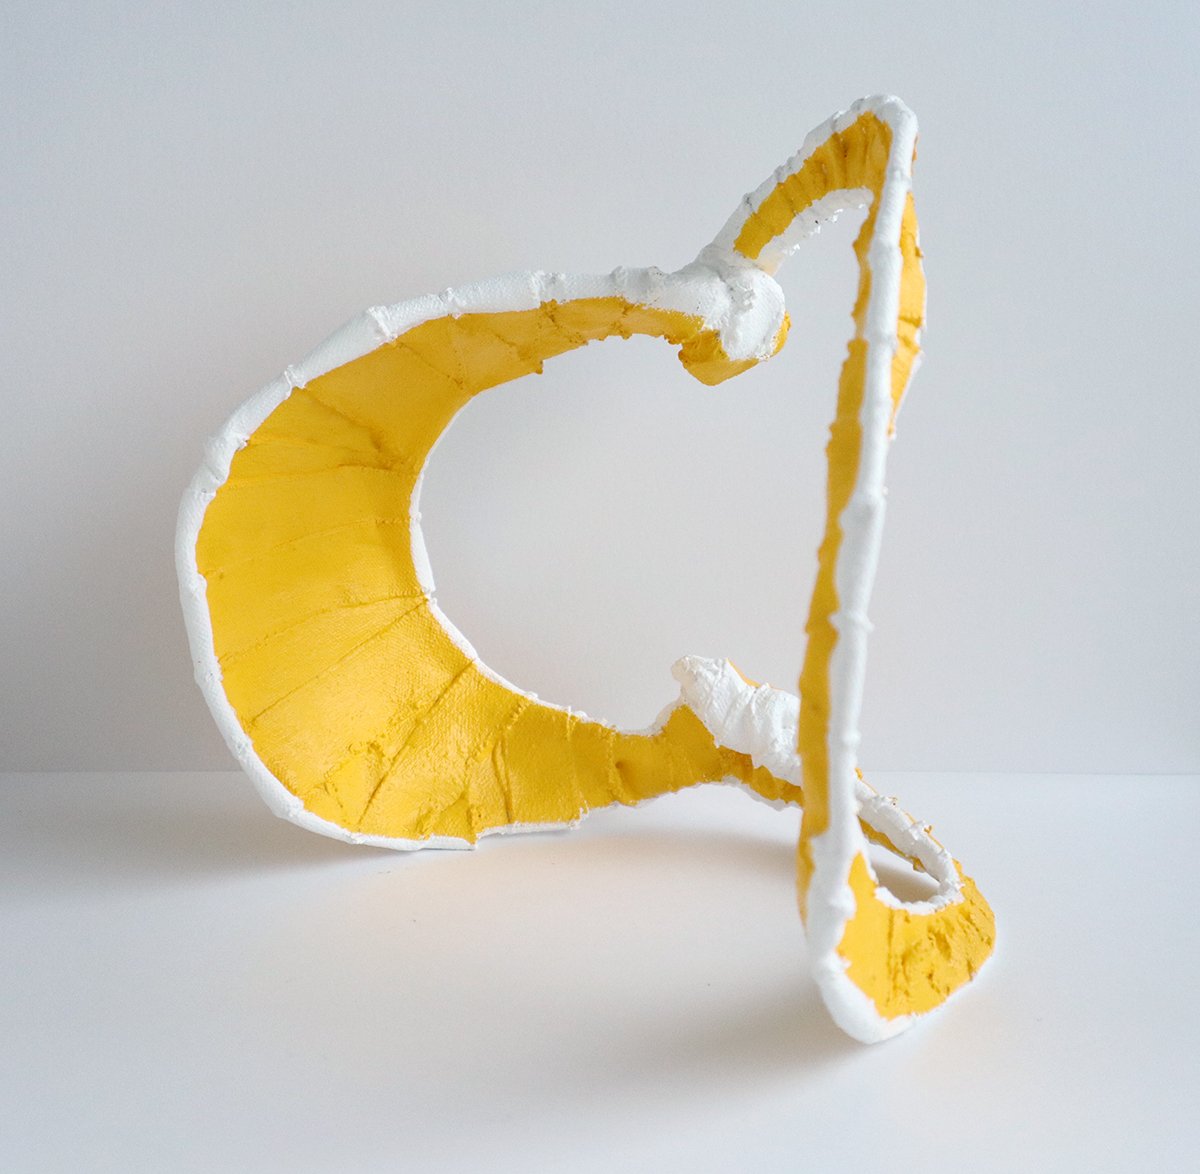  A1A (Yellow). 2019  Paint, canvas, wire  7.75 x 7.5 x 6 inches 